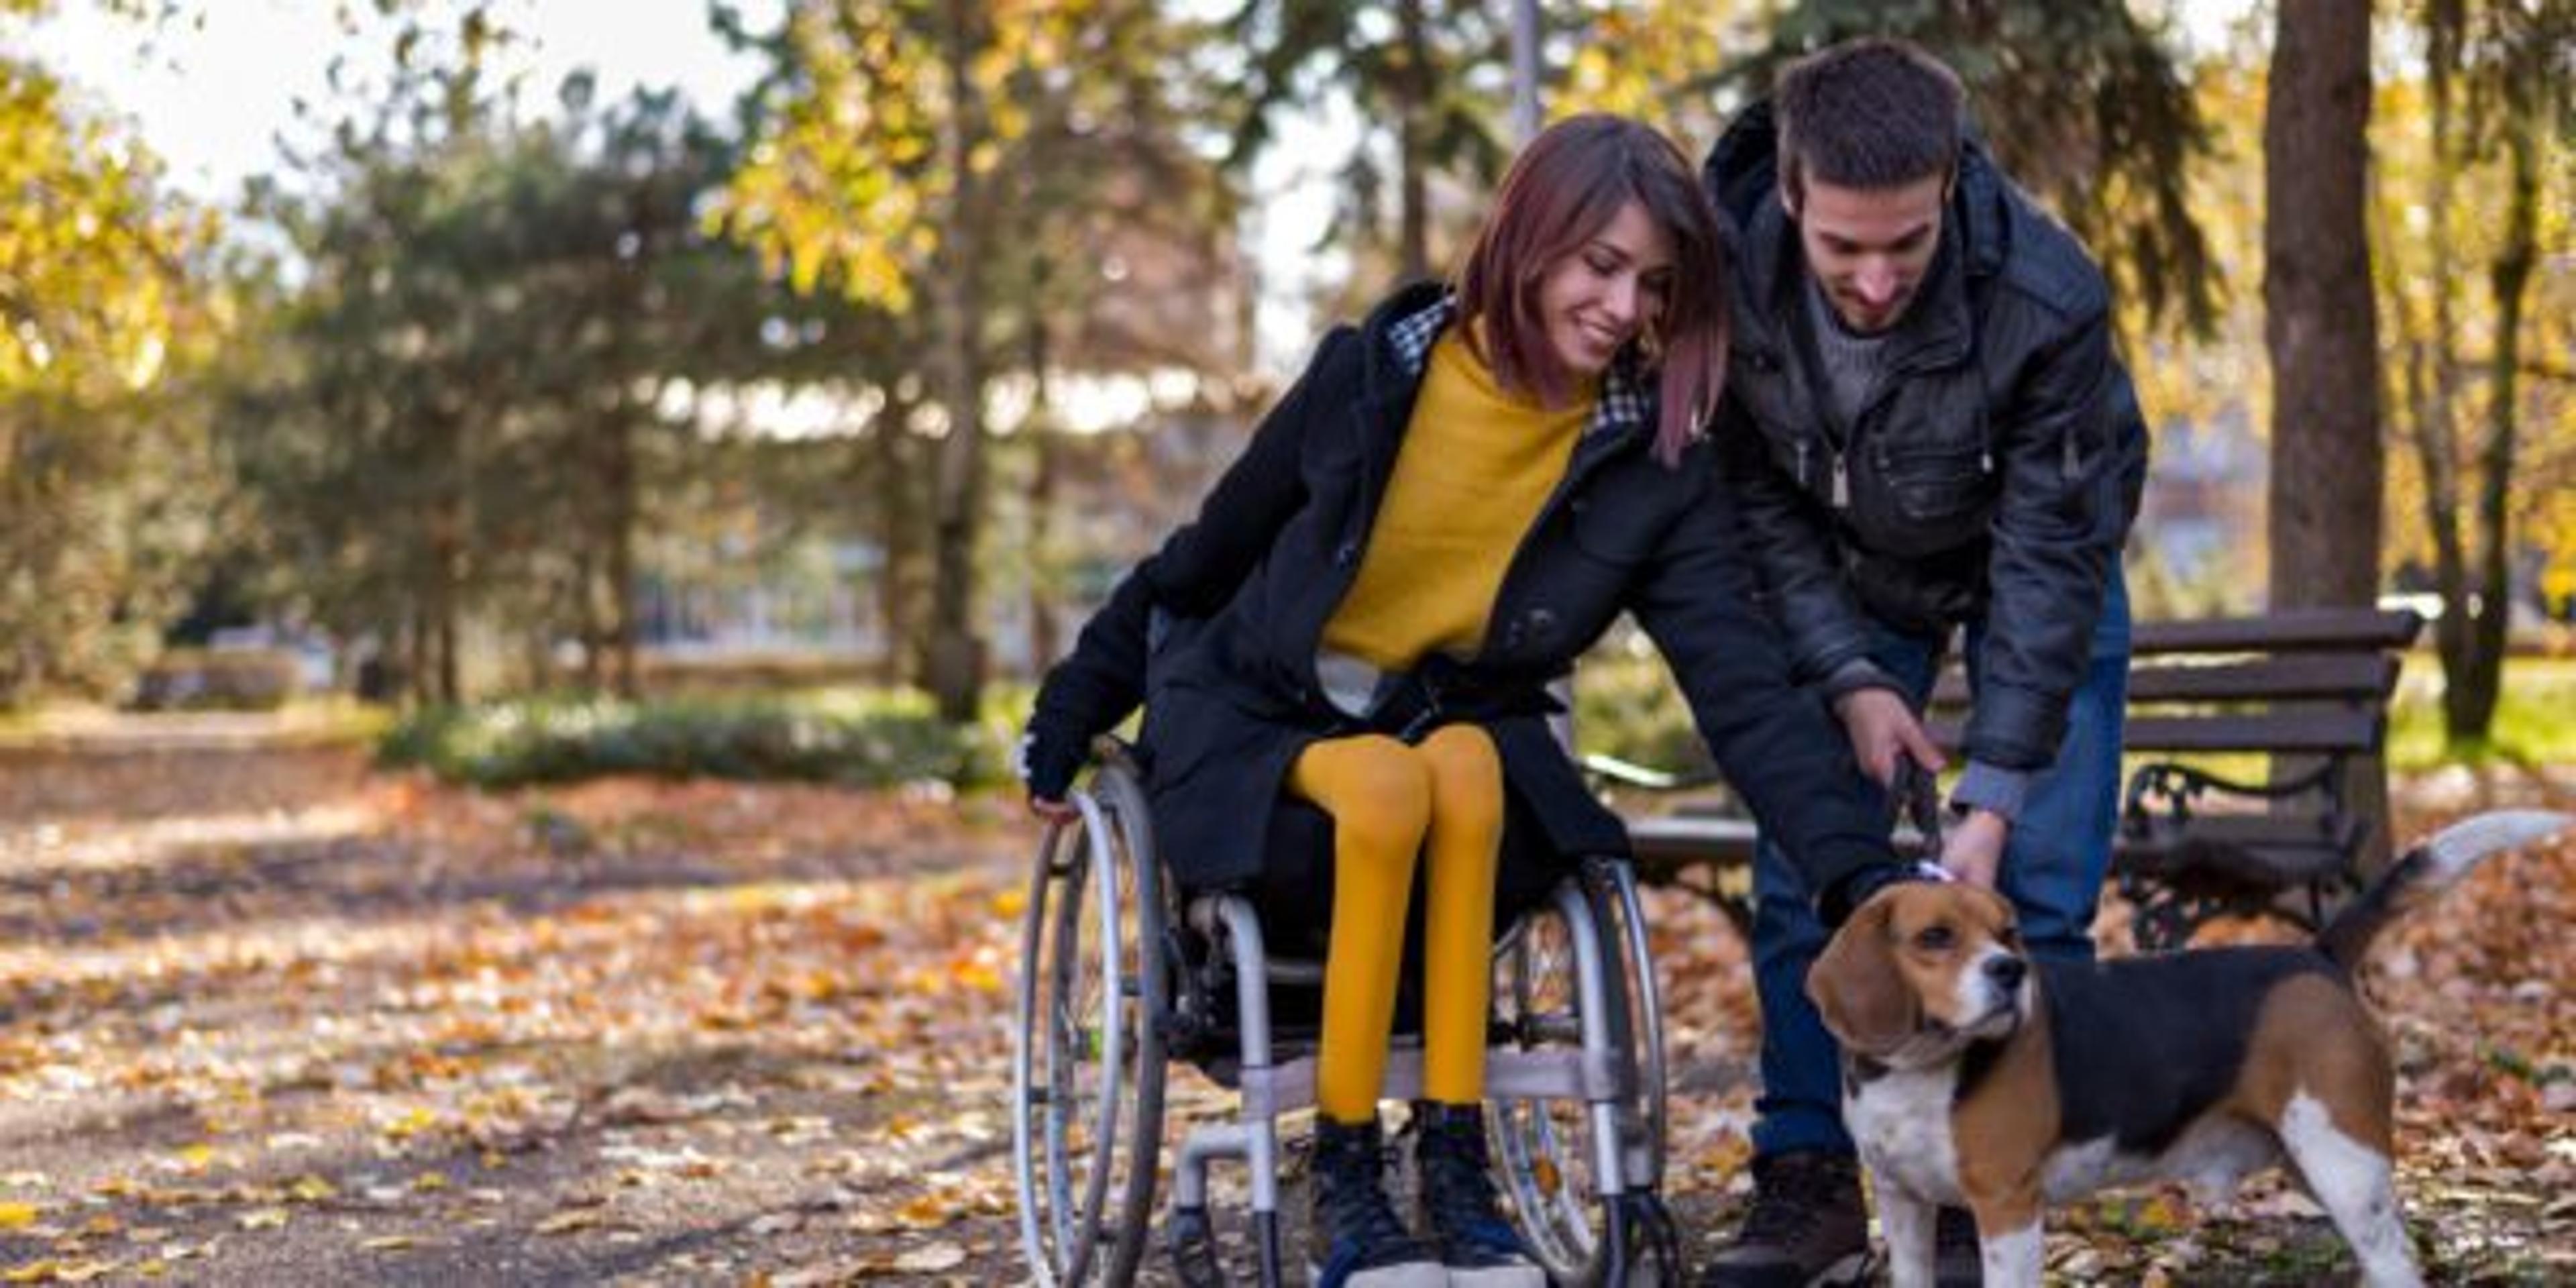 Disabled girl with boyfriend playing with dog in the park in autumn